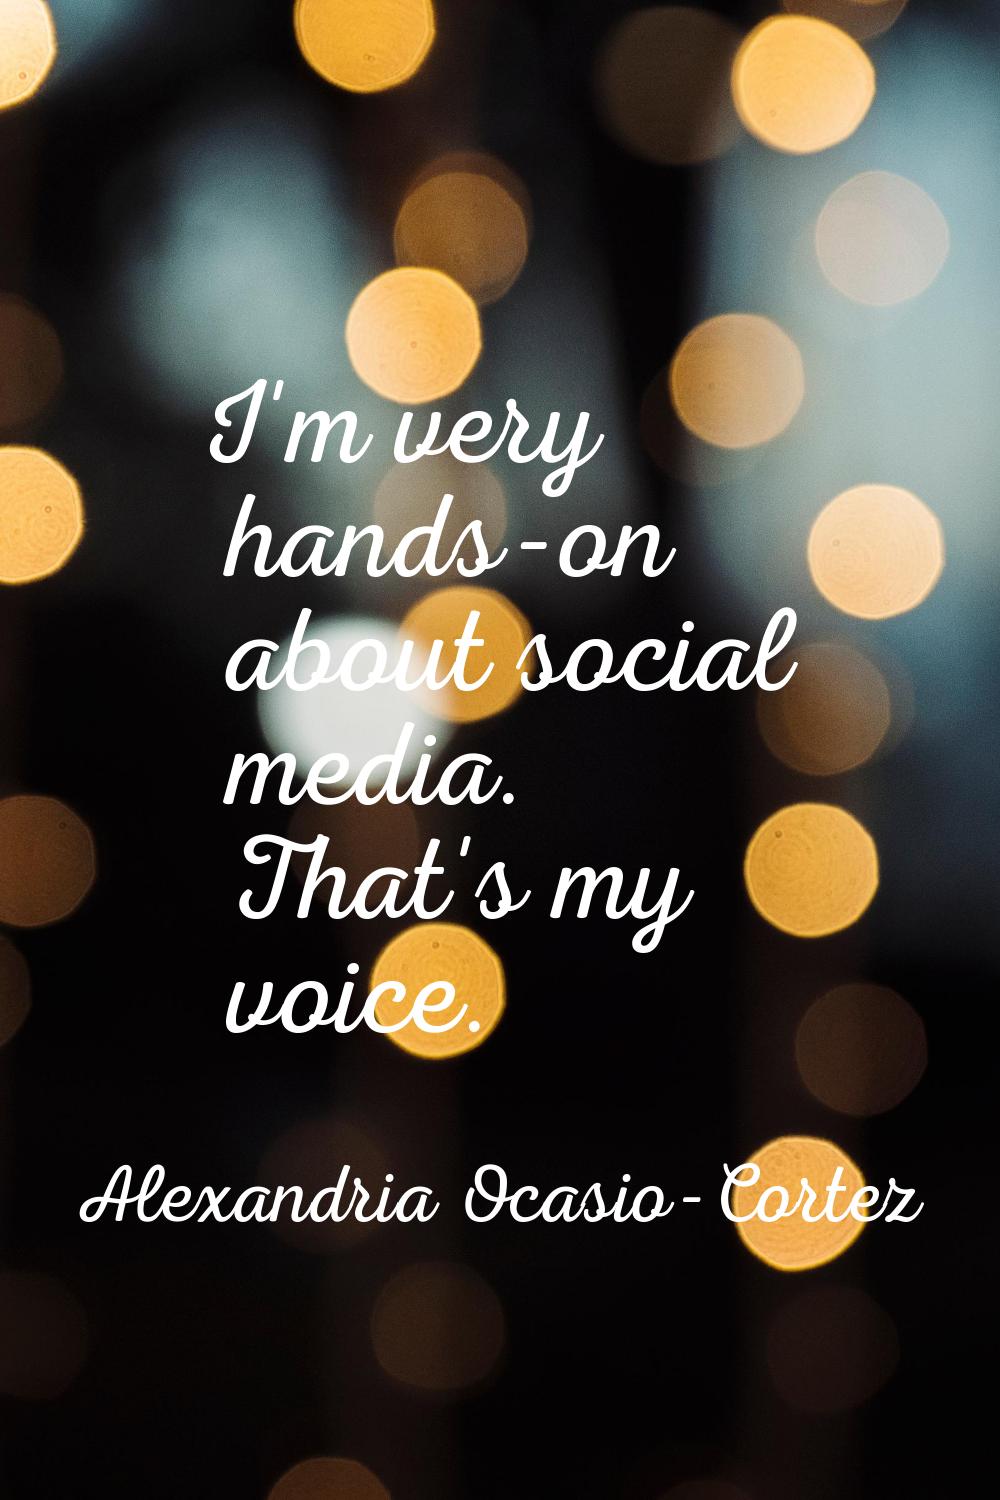 I'm very hands-on about social media. That's my voice.